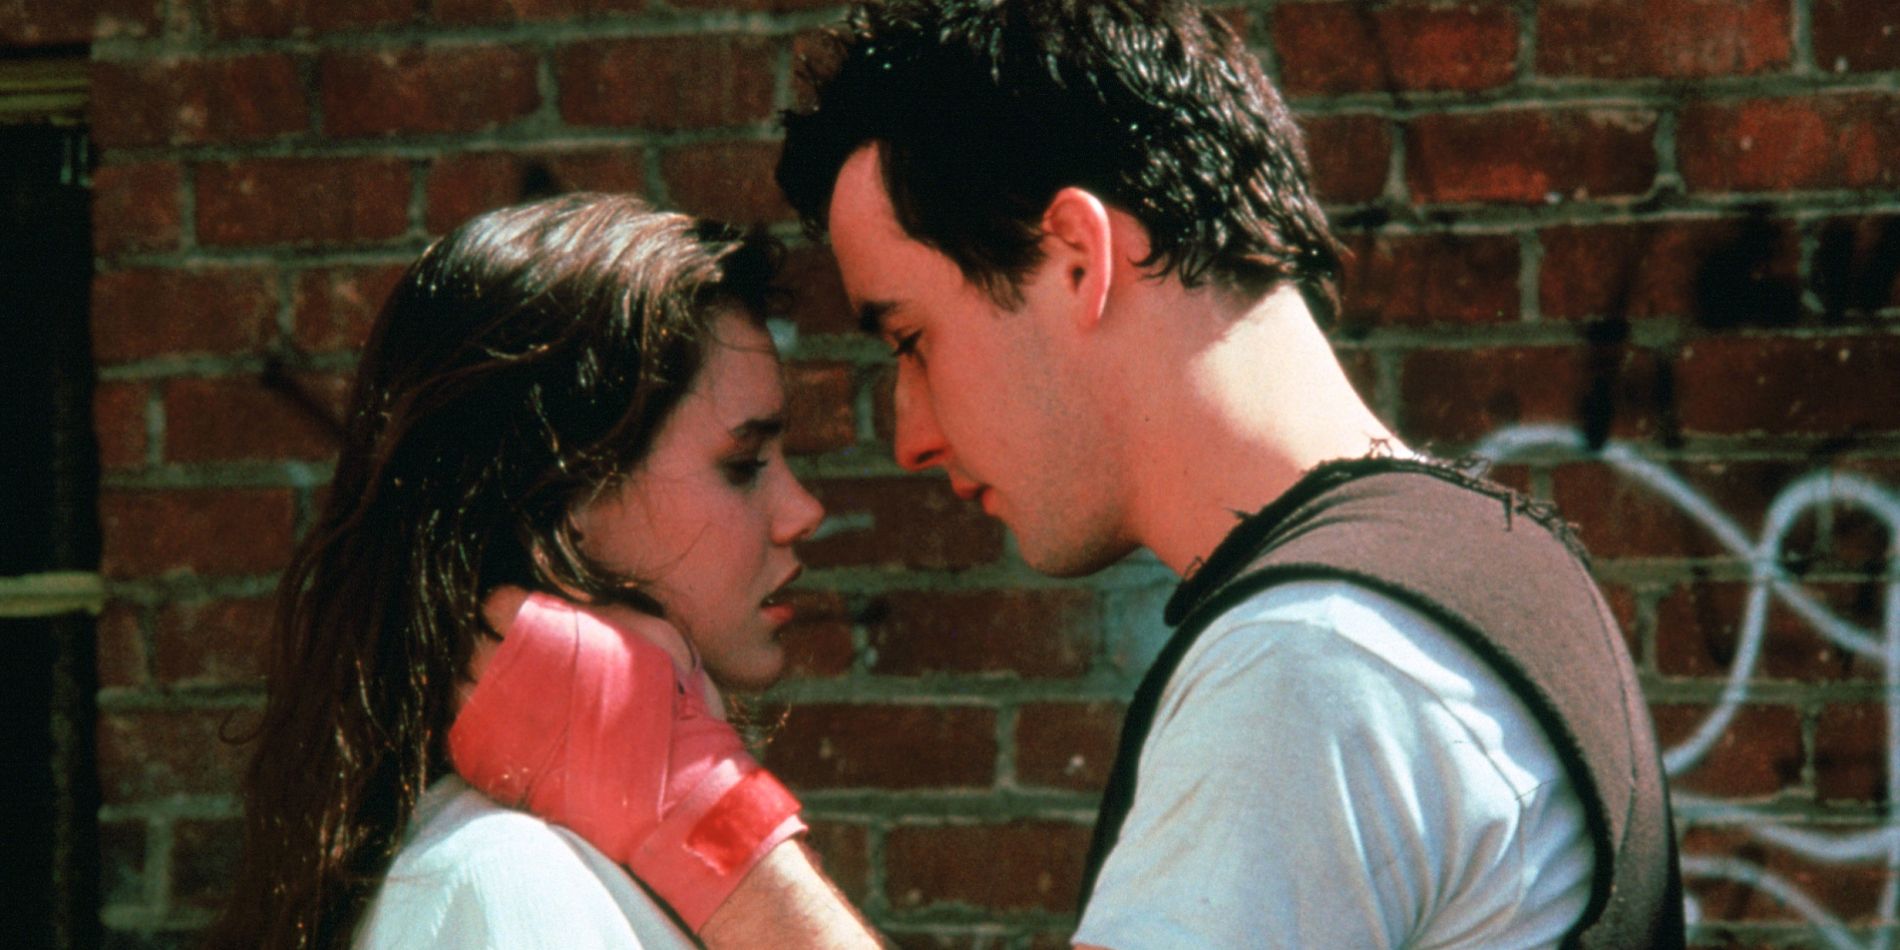 Lloyd is about to kiss Diane in the 1989 film Say Anything...